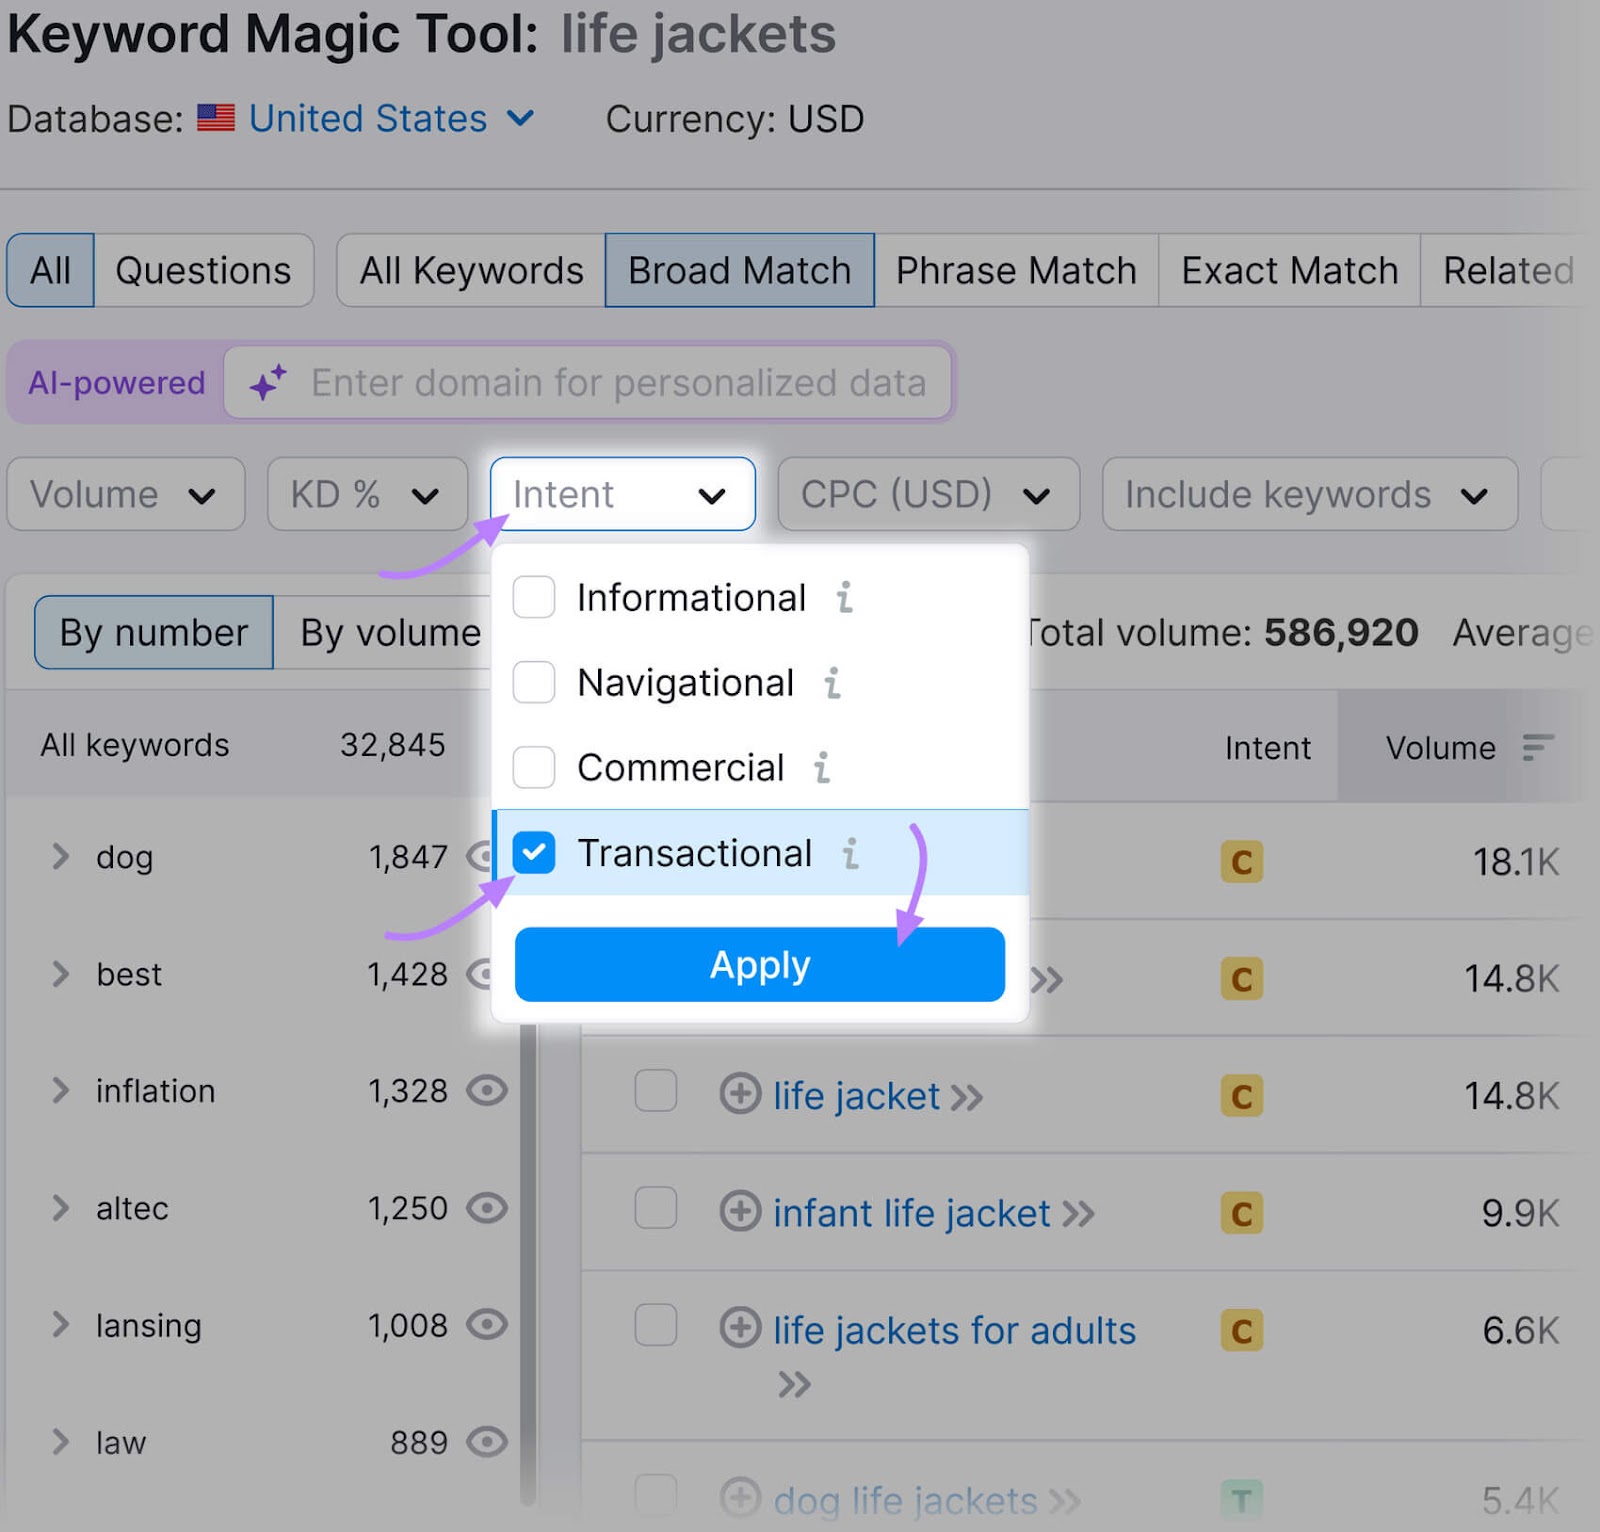 Keyword Magic Tool interface displaying intent filter options, with "Transactional" intent selected for search refinement.